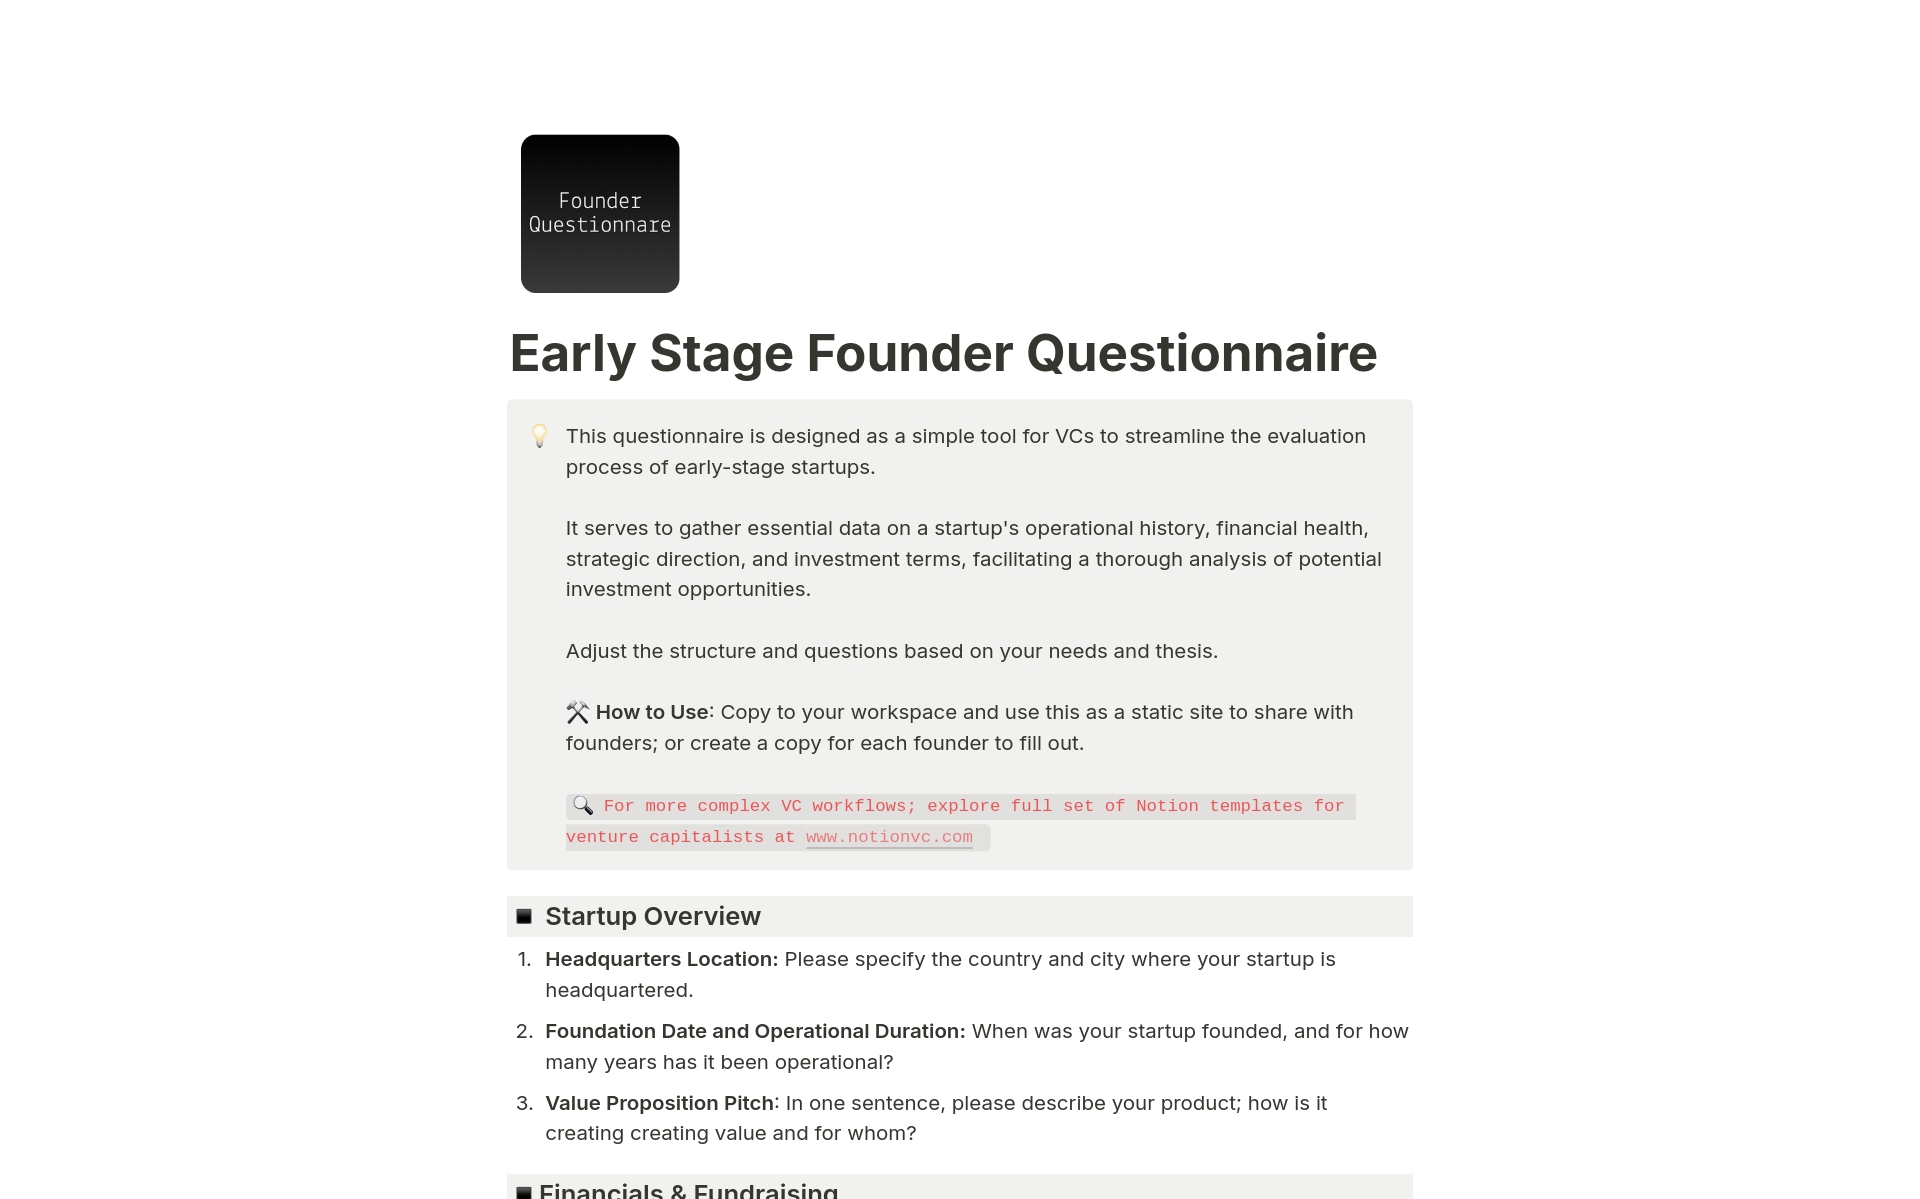 Early Stage Founder Questionnare for VCs님의 템플릿 미리보기